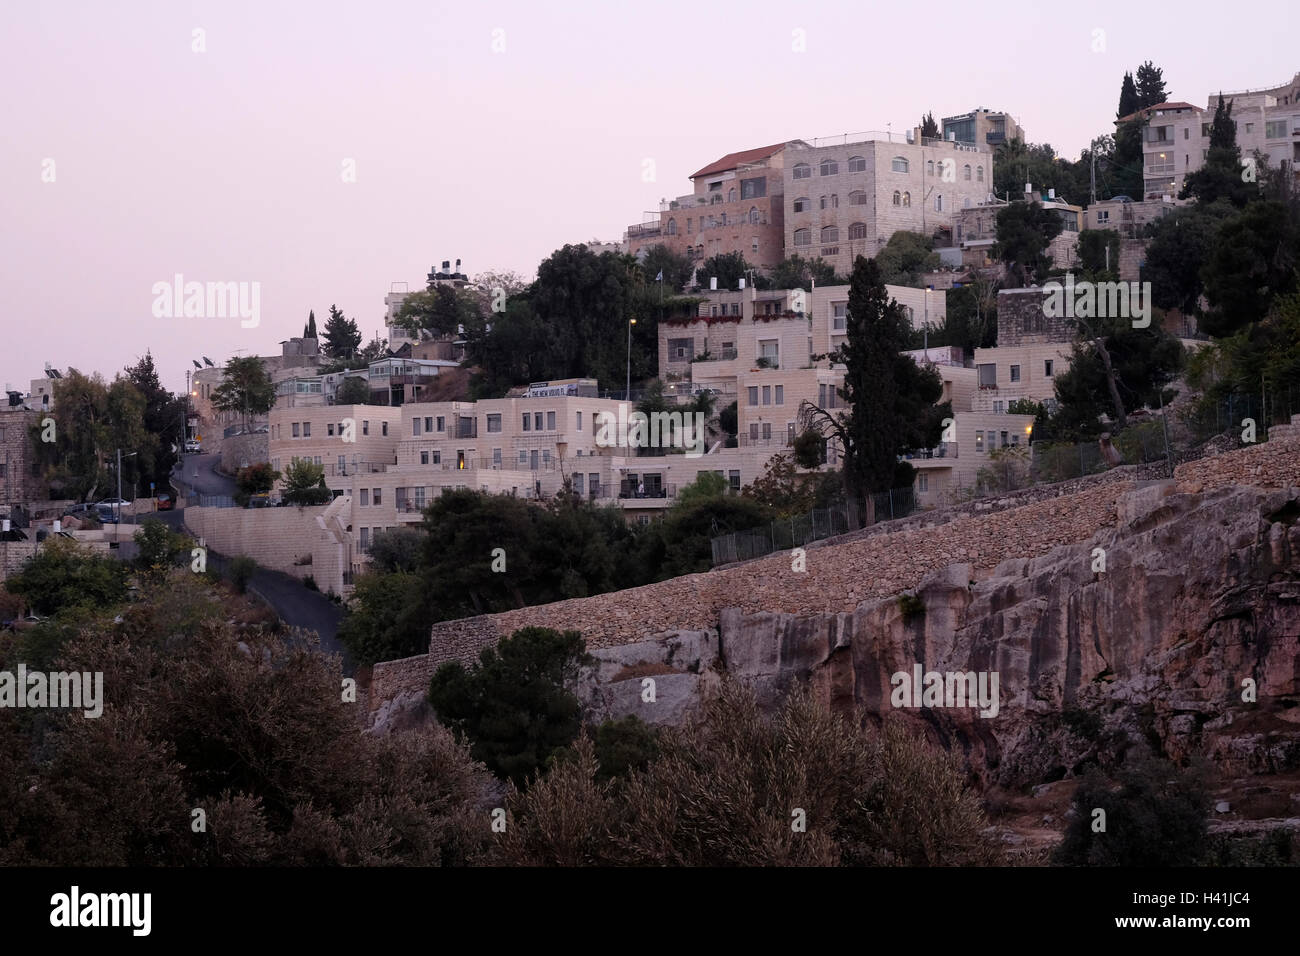 View at twilight of Abu Tor a mixed Jewish and Arab neighborhood located over valley of Hinnom the modern name for the biblical Gehenna or Gehinnom valley surrounding Jerusalem's Old City, Israel Stock Photo